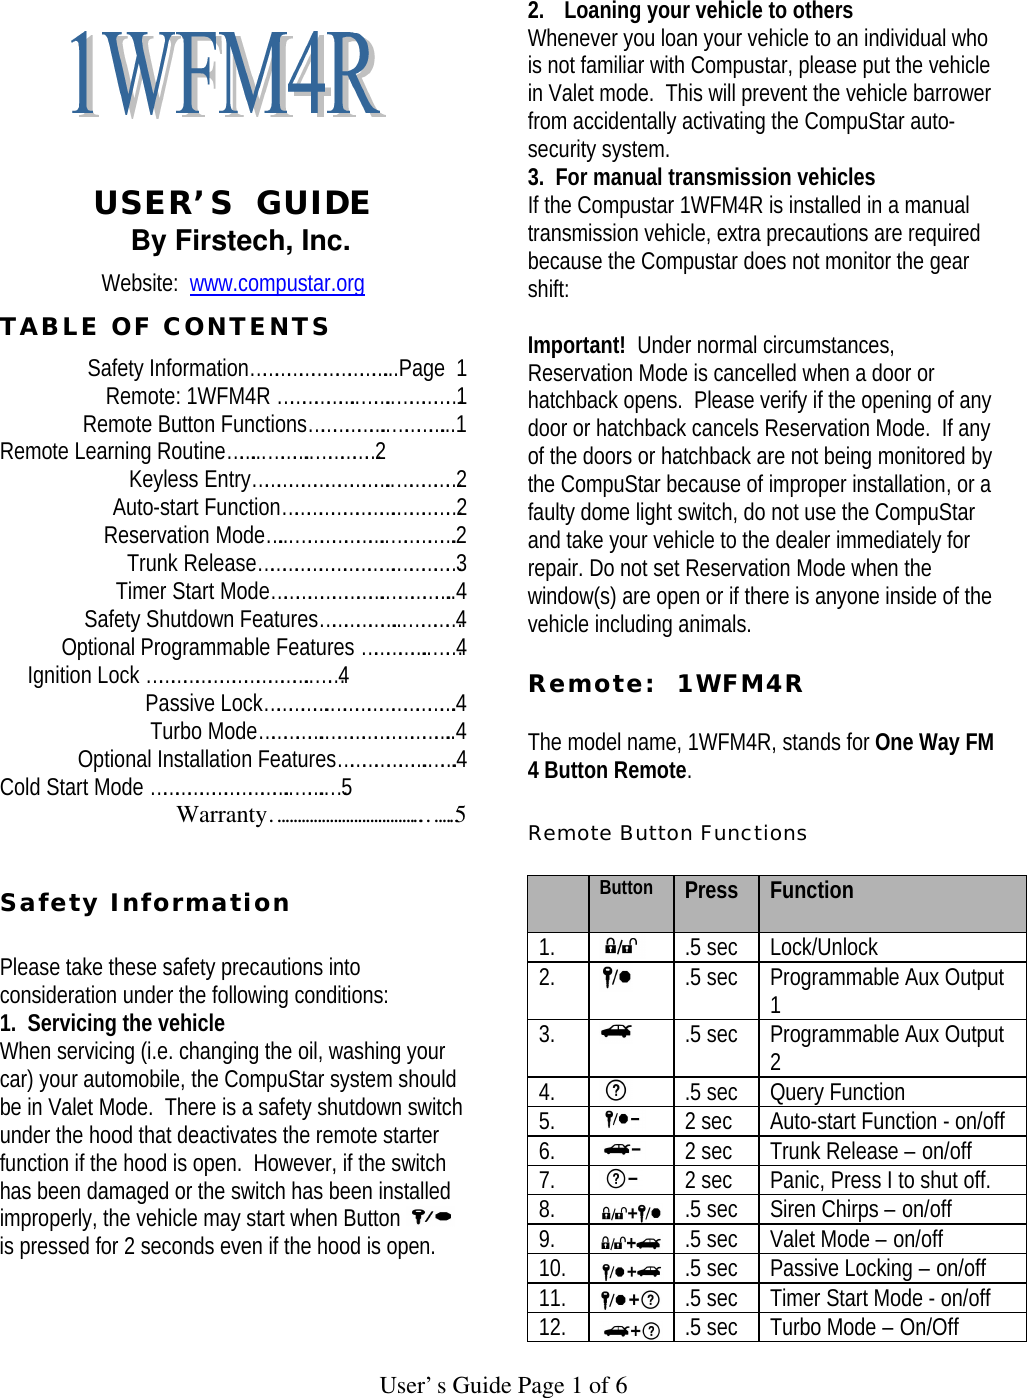   User’s Guide Page 1 of 6     USER’S  GUIDE By Firstech, Inc. Website:  www.compustar.org TABLE OF CONTENTS Safety Information……………………………...Page  1 Remote: 1WFM4R ………………..……..……………1 Remote Button Functions………………..…………...1   Remote Learning Routine……...………..……………2 Keyless Entry……………………………..……………2 Auto-start Function……………………….……………2 Reservation Mode…...…………………..…………….2 Trunk Release…………………………….……………3 Timer Start Mode……………………….……………..4 Safety Shutdown Features………………...…………4 Optional Programmable Features ……………..……4      Ignition Lock …………………………………..……4    Passive Lock…………….………………………….4      Turbo Mode…………….…………………………..4    Optional Installation Features………………….…….4 Cold Start Mode ……………………………..……..…5 Warranty………………………………..…….5   Safety Information   Please take these safety precautions into consideration under the following conditions:  1.  Servicing the vehicle When servicing (i.e. changing the oil, washing your car) your automobile, the CompuStar system should be in Valet Mode.  There is a safety shutdown switch under the hood that deactivates the remote starter function if the hood is open.  However, if the switch has been damaged or the switch has been installed improperly, the vehicle may start when Button   is pressed for 2 seconds even if the hood is open.     2. Loaning your vehicle to others Whenever you loan your vehicle to an individual who is not familiar with Compustar, please put the vehicle in Valet mode.  This will prevent the vehicle barrower from accidentally activating the CompuStar auto-security system.   3.  For manual transmission vehicles If the Compustar 1WFM4R is installed in a manual transmission vehicle, extra precautions are required because the Compustar does not monitor the gear shift:   Important!  Under normal circumstances, Reservation Mode is cancelled when a door or hatchback opens.  Please verify if the opening of any door or hatchback cancels Reservation Mode.  If any of the doors or hatchback are not being monitored by the CompuStar because of improper installation, or a faulty dome light switch, do not use the CompuStar and take your vehicle to the dealer immediately for repair. Do not set Reservation Mode when the window(s) are open or if there is anyone inside of the vehicle including animals.   Remote:  1WFM4R    The model name, 1WFM4R, stands for One Way FM 4 Button Remote.   Remote Button Functions   Button Press  Function 1.  .5 sec Lock/Unlock 2.  .5 sec Programmable Aux Output 1 3.  .5 sec Programmable Aux Output 2 4.  .5 sec Query Function  5.  2 sec Auto-start Function - on/off 6.  2 sec Trunk Release – on/off 7.  2 sec Panic, Press I to shut off.  8.  .5 sec Siren Chirps – on/off 9.  .5 sec Valet Mode – on/off 10.  .5 sec Passive Locking – on/off 11.  .5 sec Timer Start Mode - on/off 12.  .5 sec Turbo Mode – On/Off 